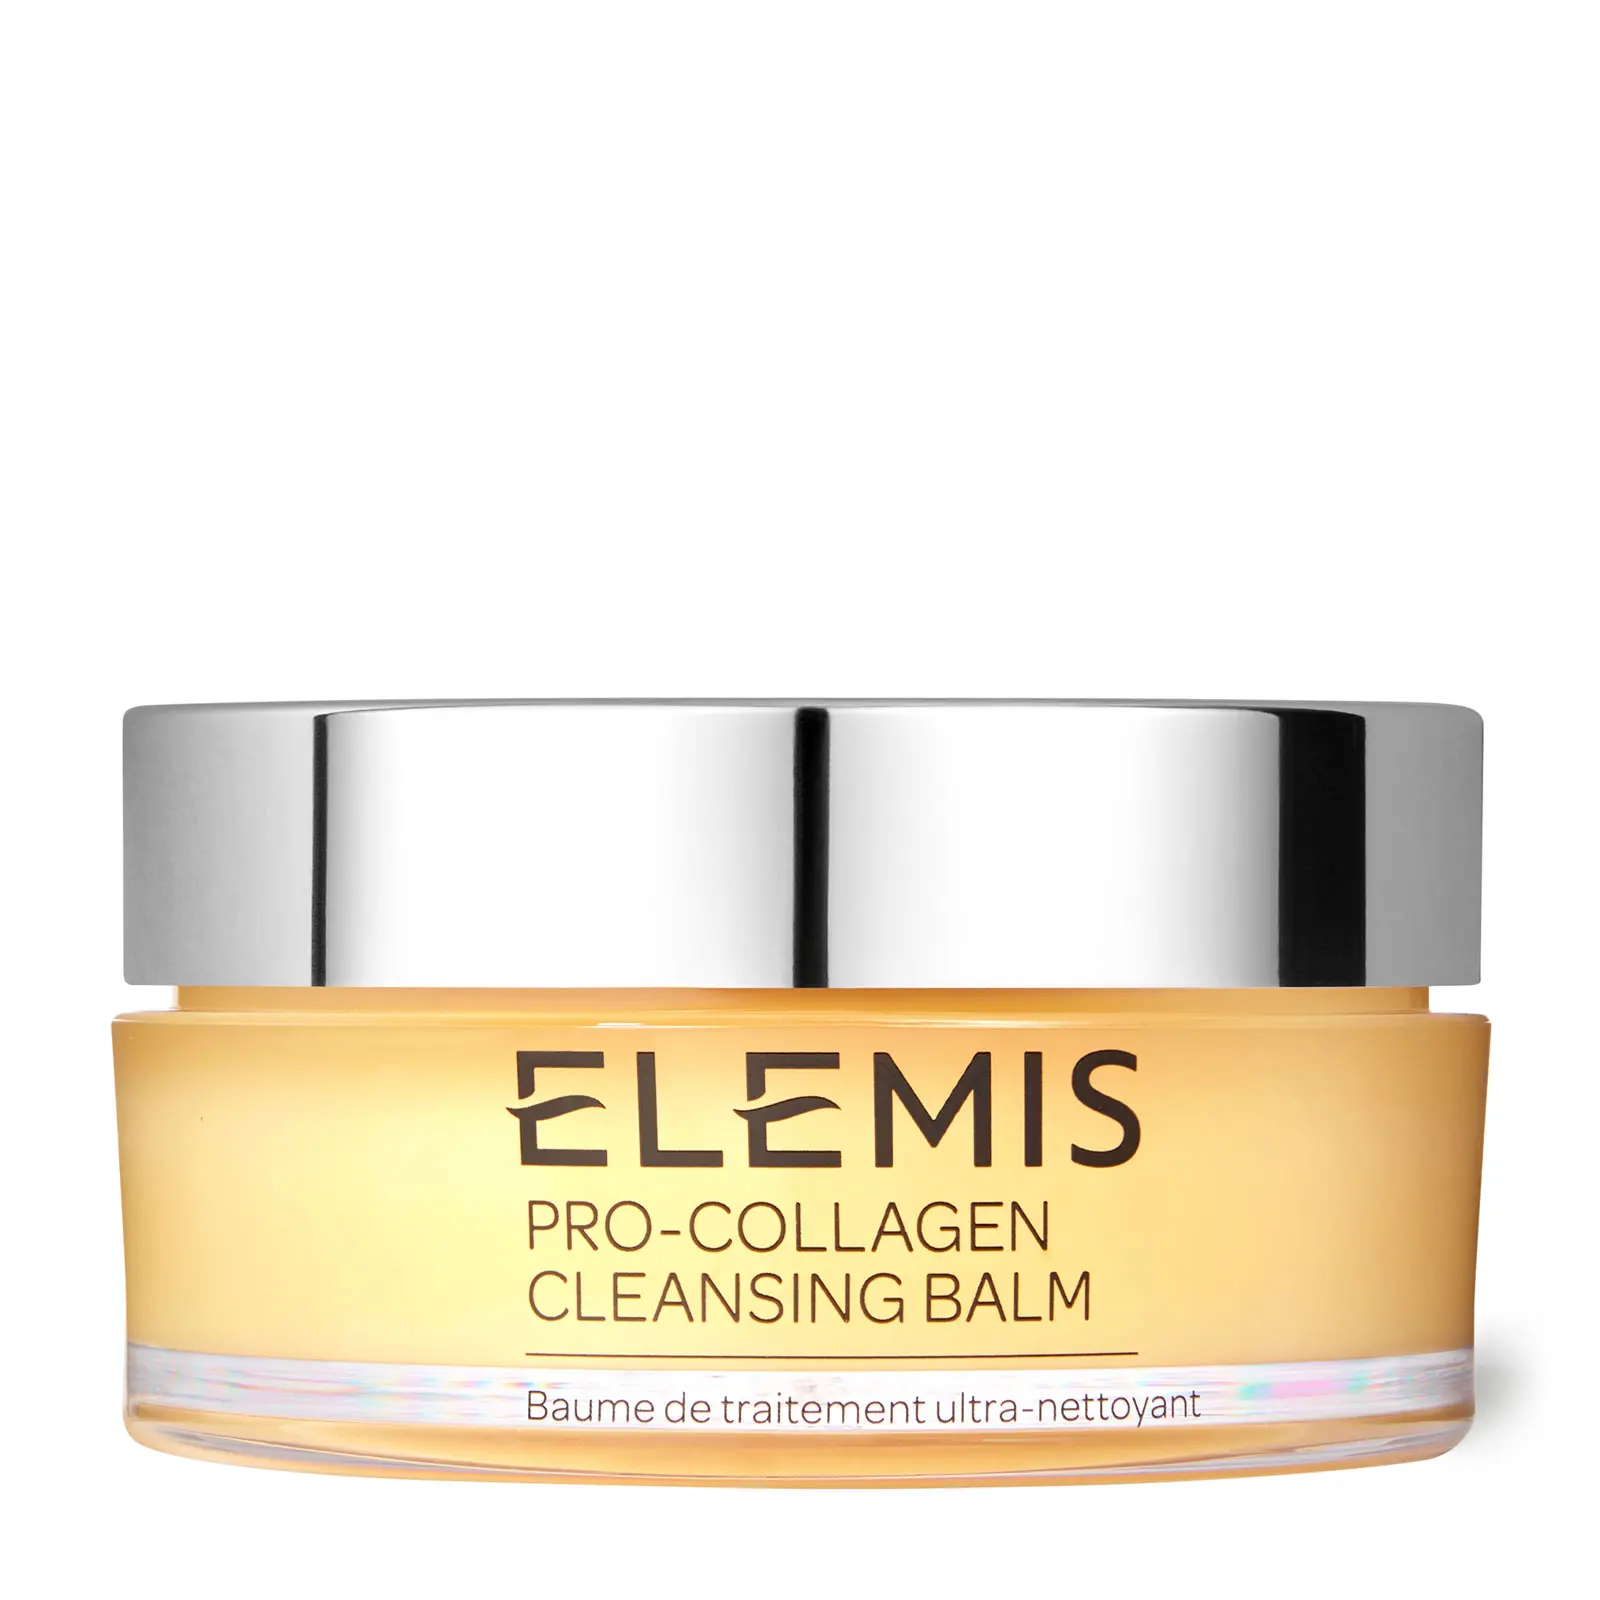 ELEMIS Pro-Collagen Cleansing Balm 100g Discounts and Cashback